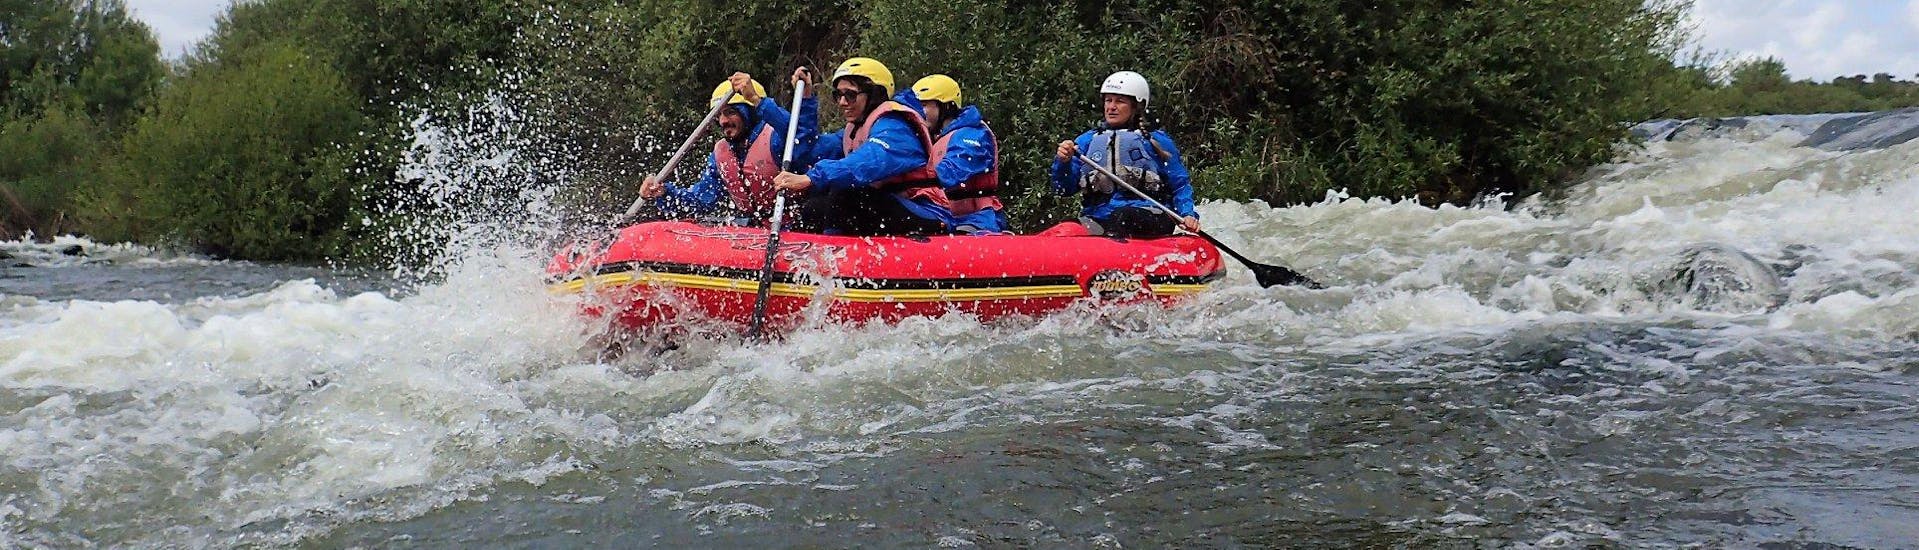 Leichte Rafting-Tour - Guadiana.